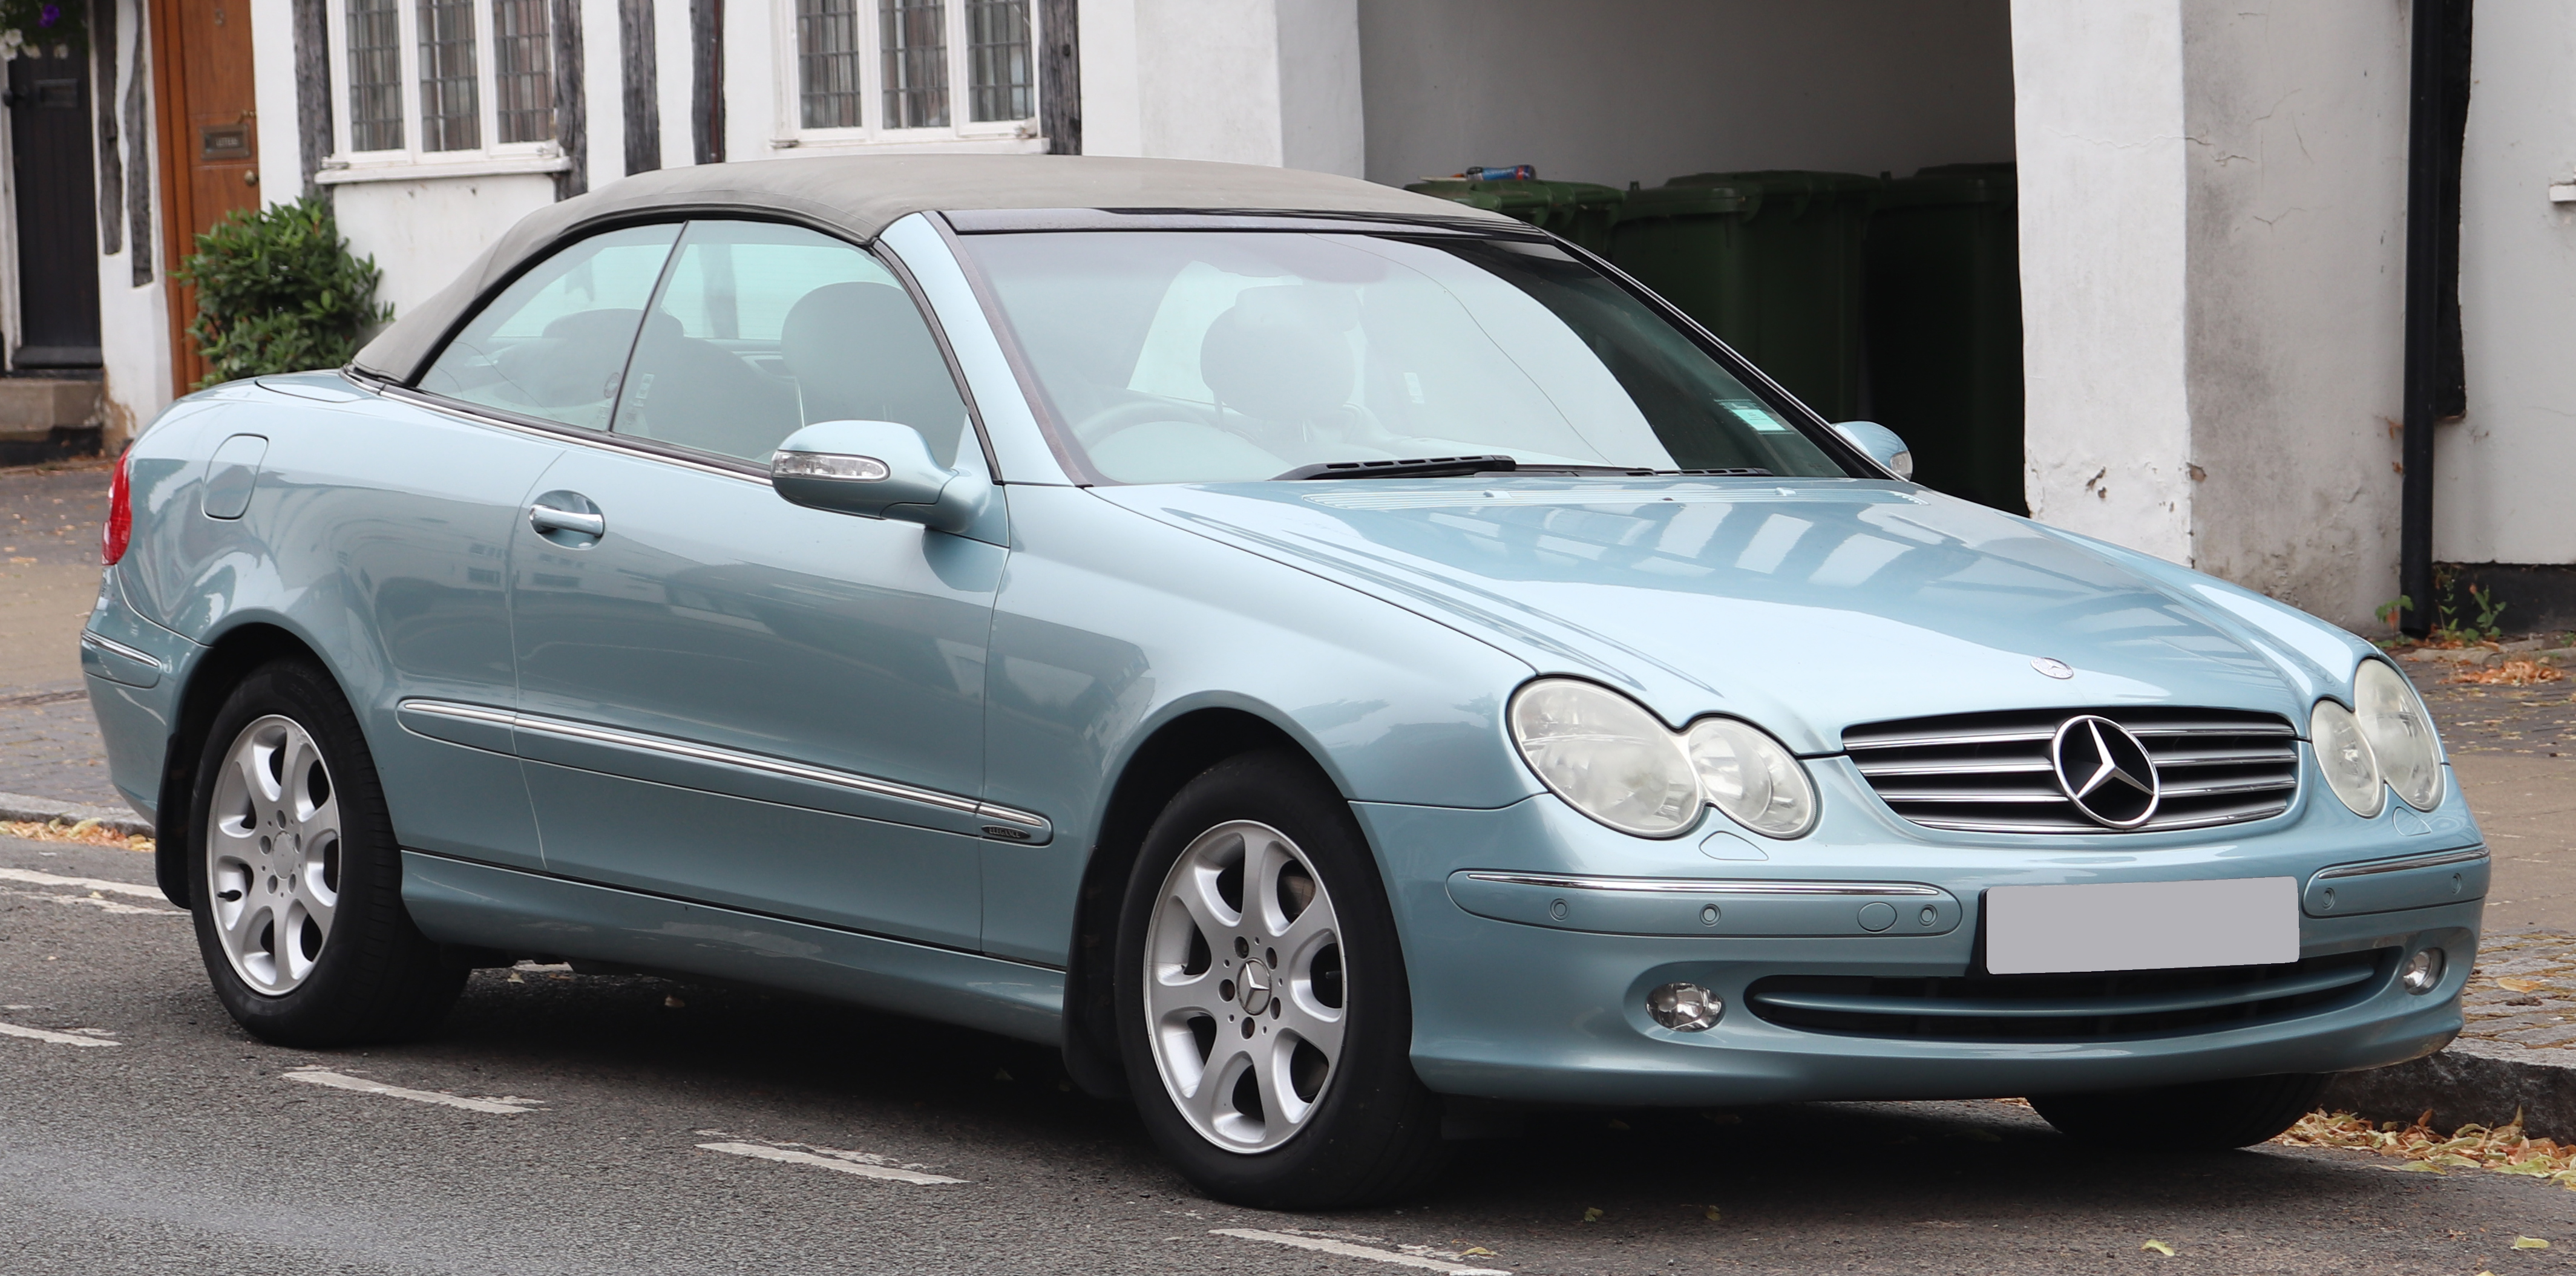 File:2004 Mercedes-Benz CLK 320 Elegance Automatic 3.2 Front.jpg -  Wikimedia Commons